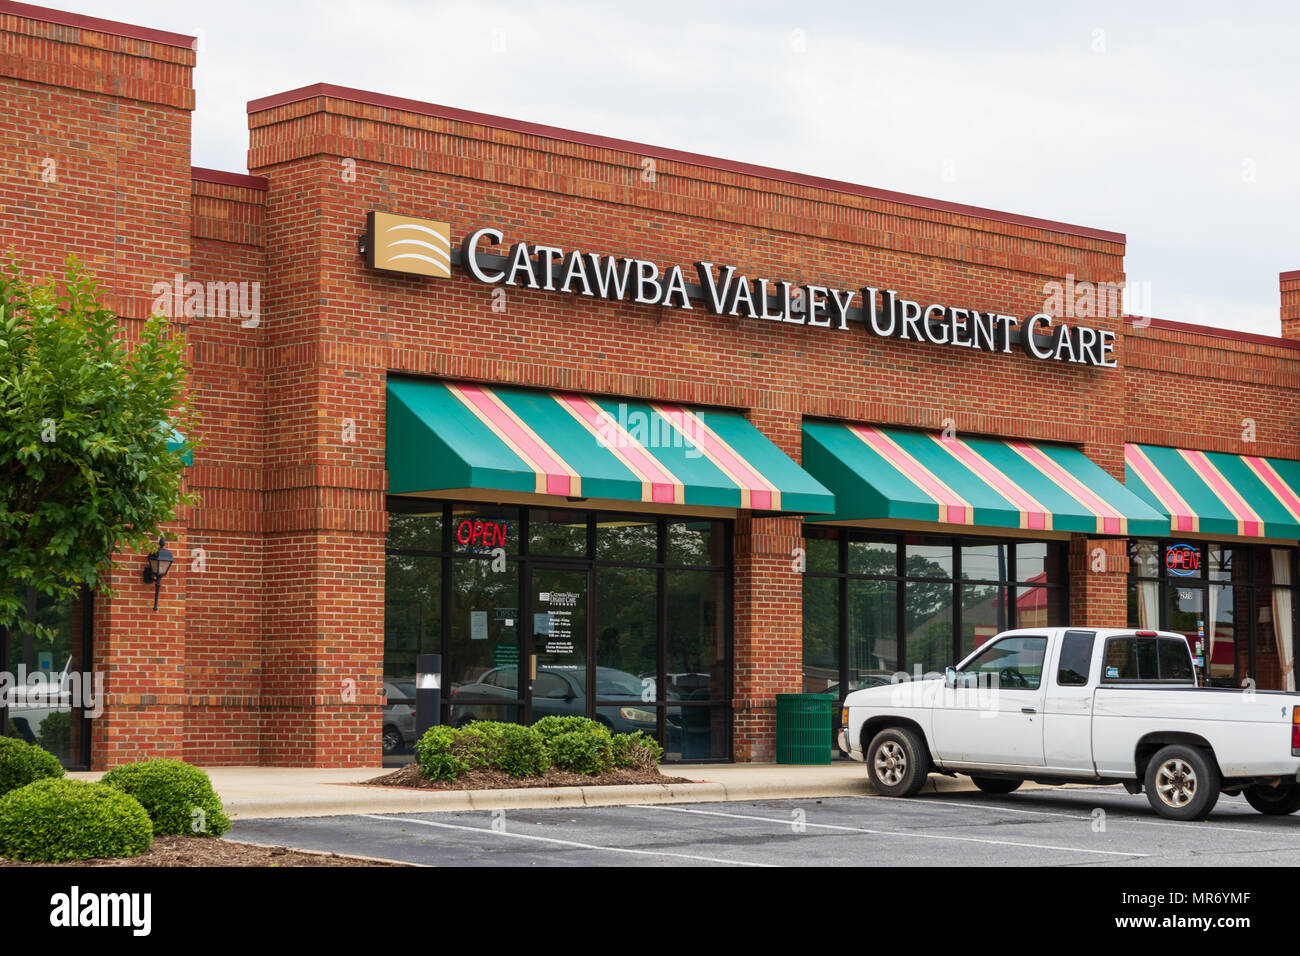 HICKORY, NC, USA-21 Mai 18: Private Emergency health services Immer häufiger sind in den USA, wie dieser Catawba Valley Urgent Care Facility. Stockfoto